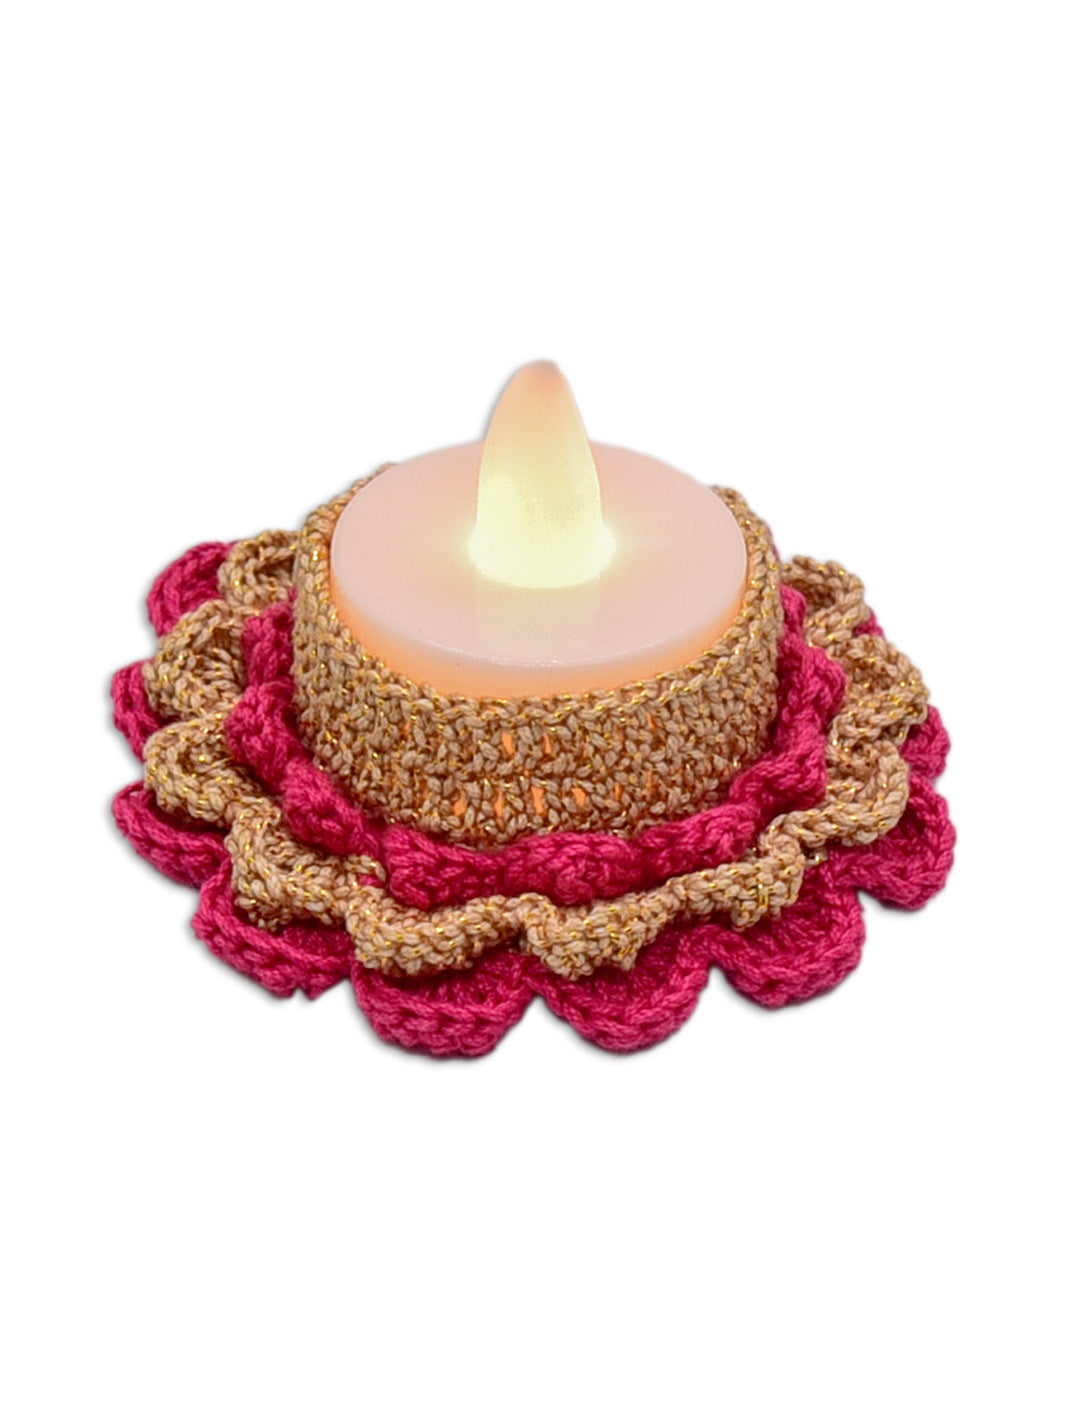 Handcrafted Floral Crochet Tealight- Pink